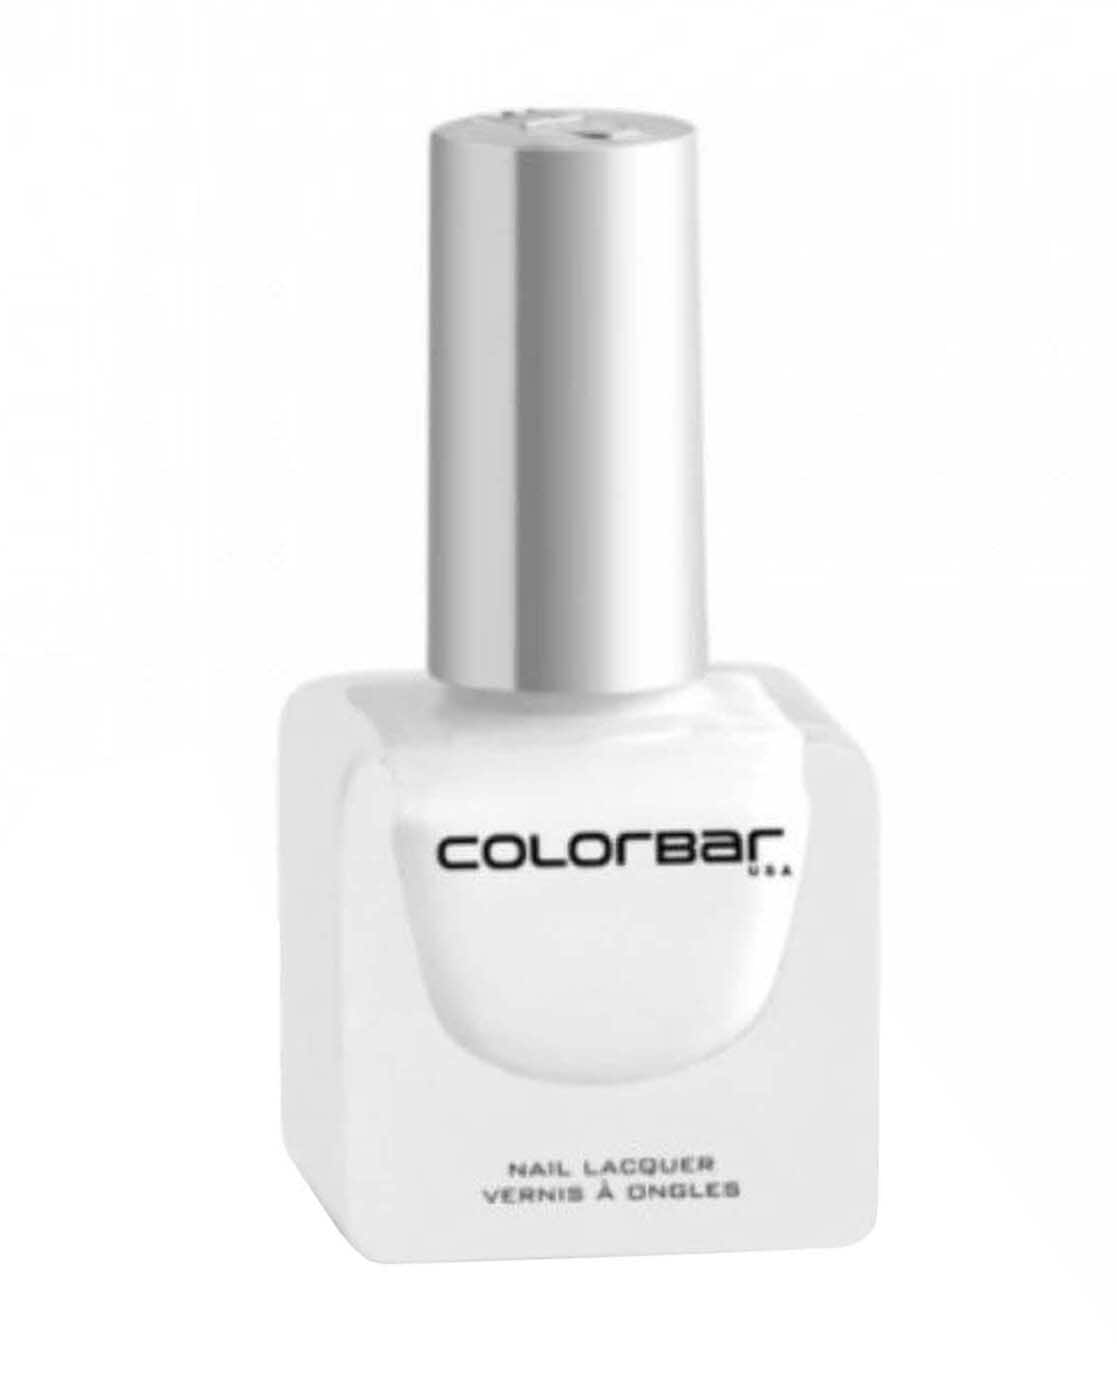 Stunning Colorbar Nail Polishes for a Glamorous Look-cacanhphuclong.com.vn